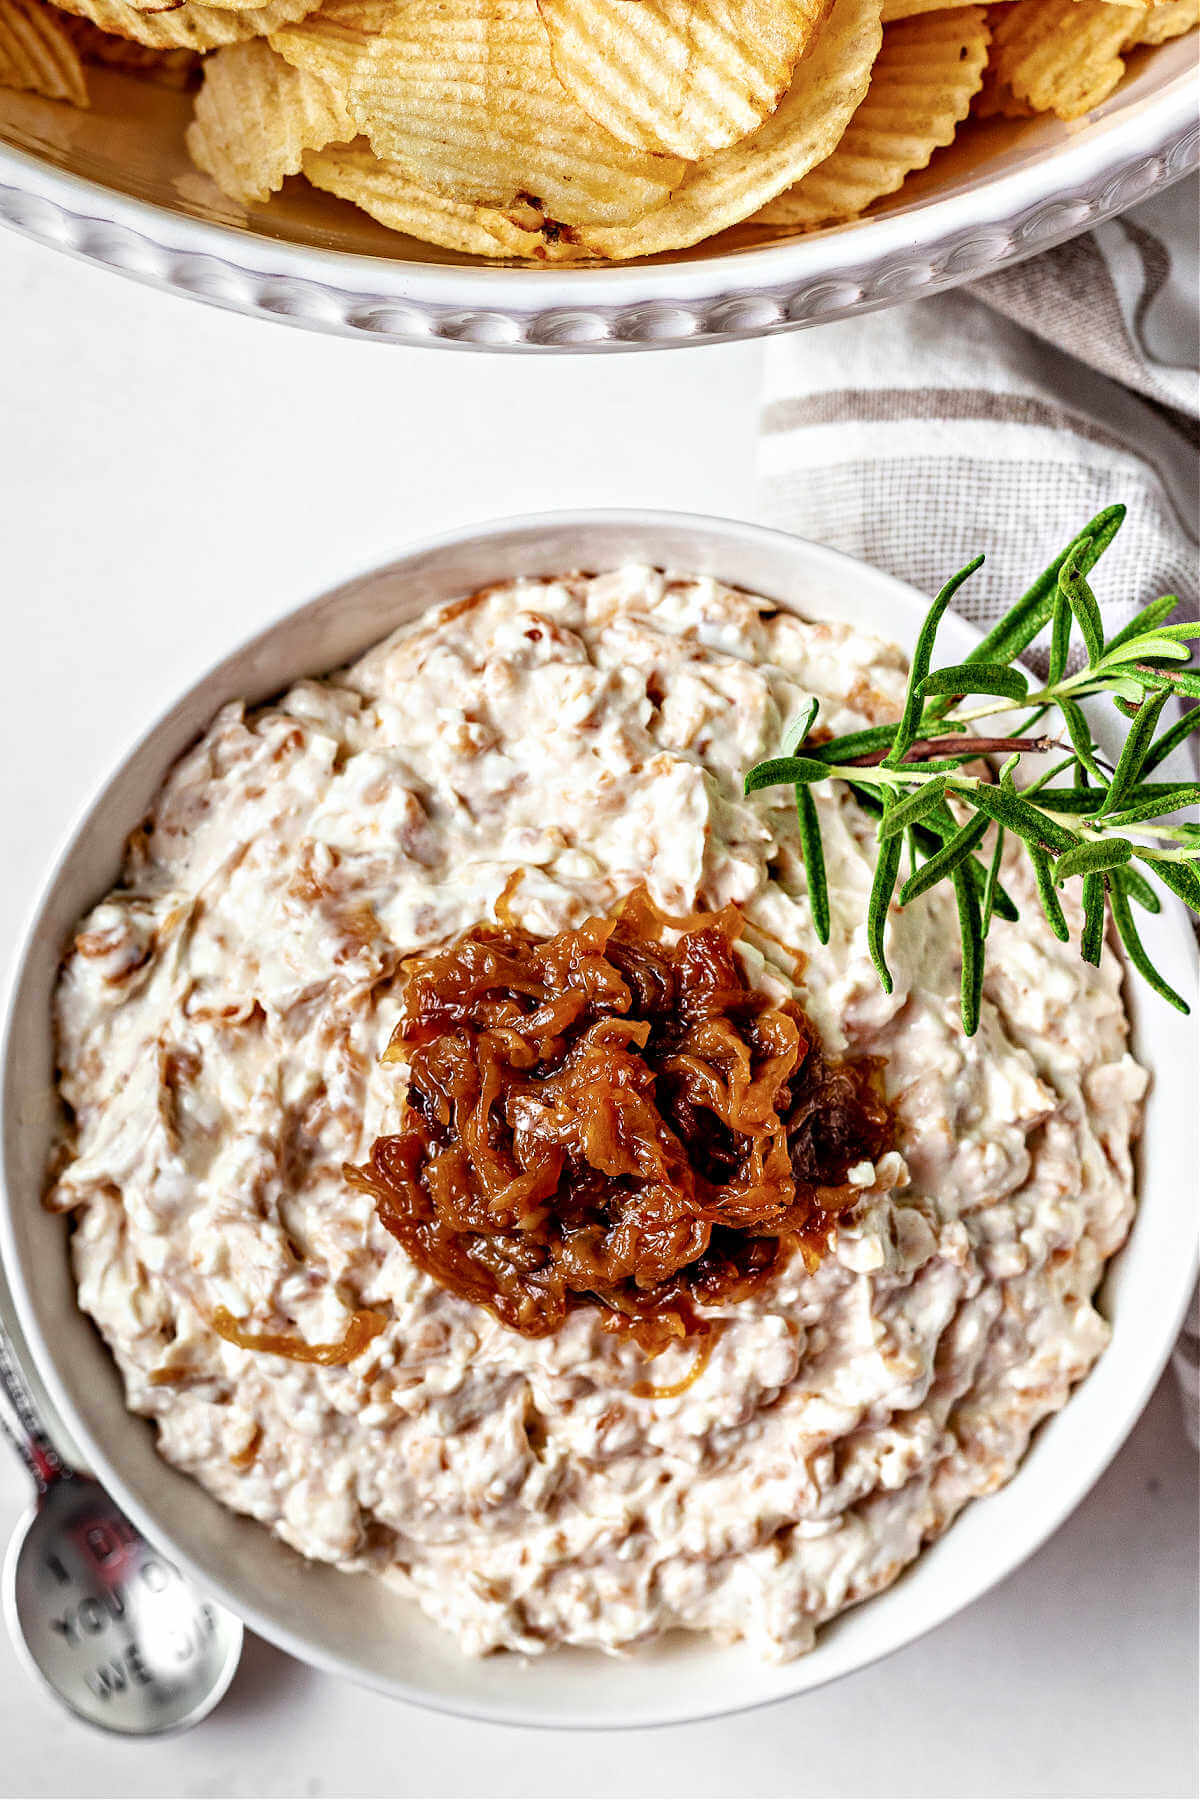 a bowl of caramelized onion dip garnished with rosemary and more caramelized onions on a table with a bowl of potato chips.